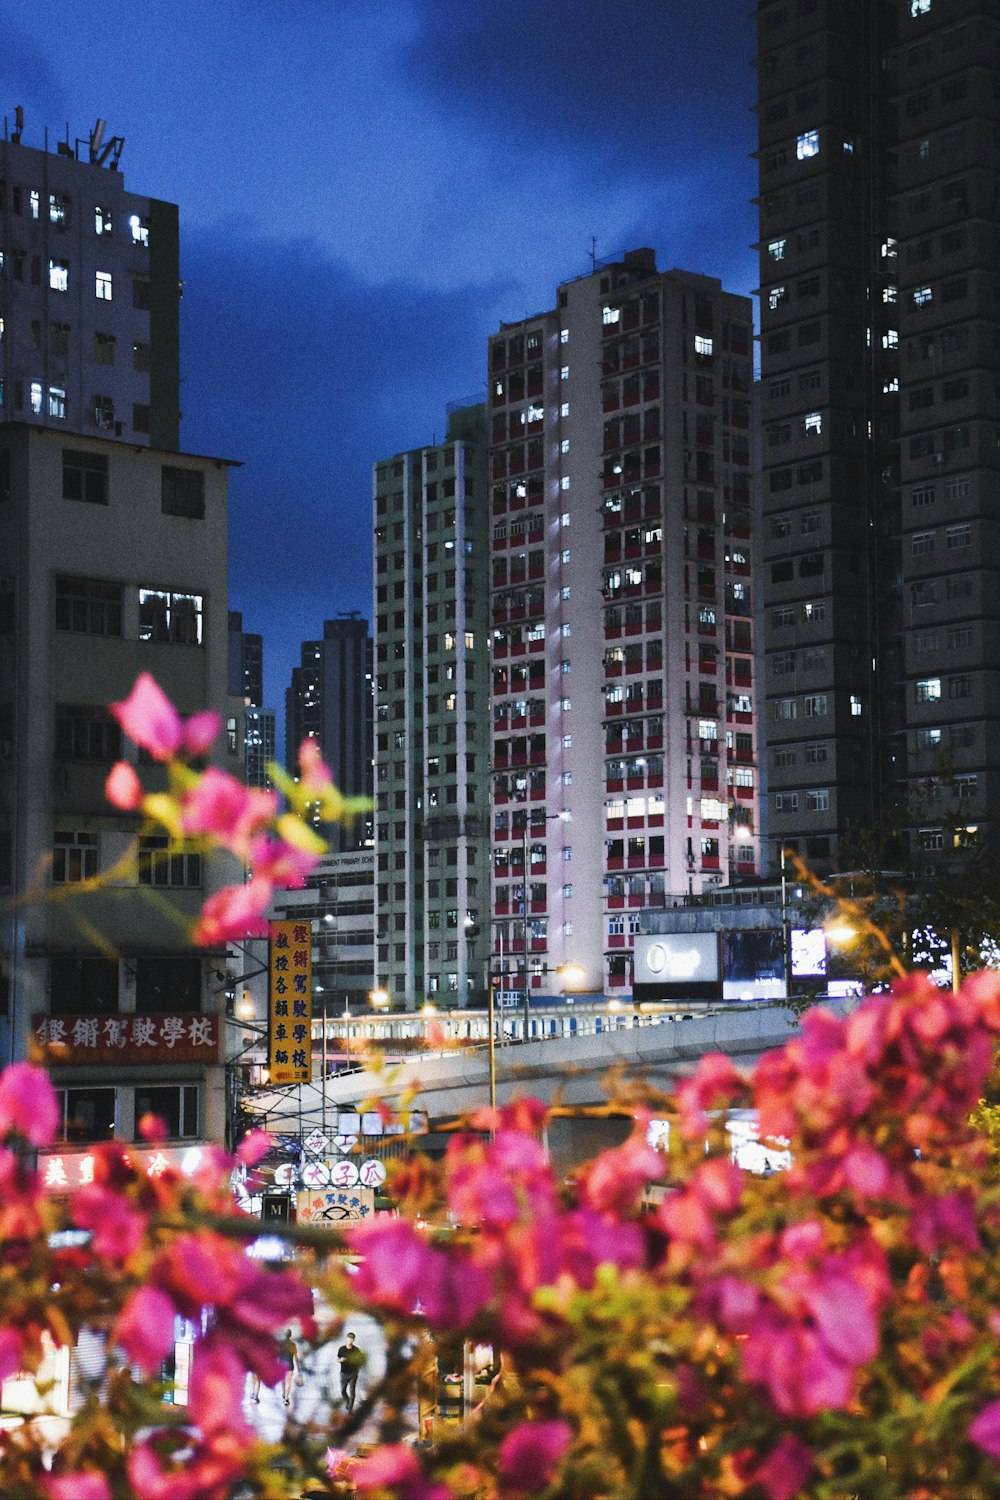 pink and yellow flowers near high rise buildings during nighttime